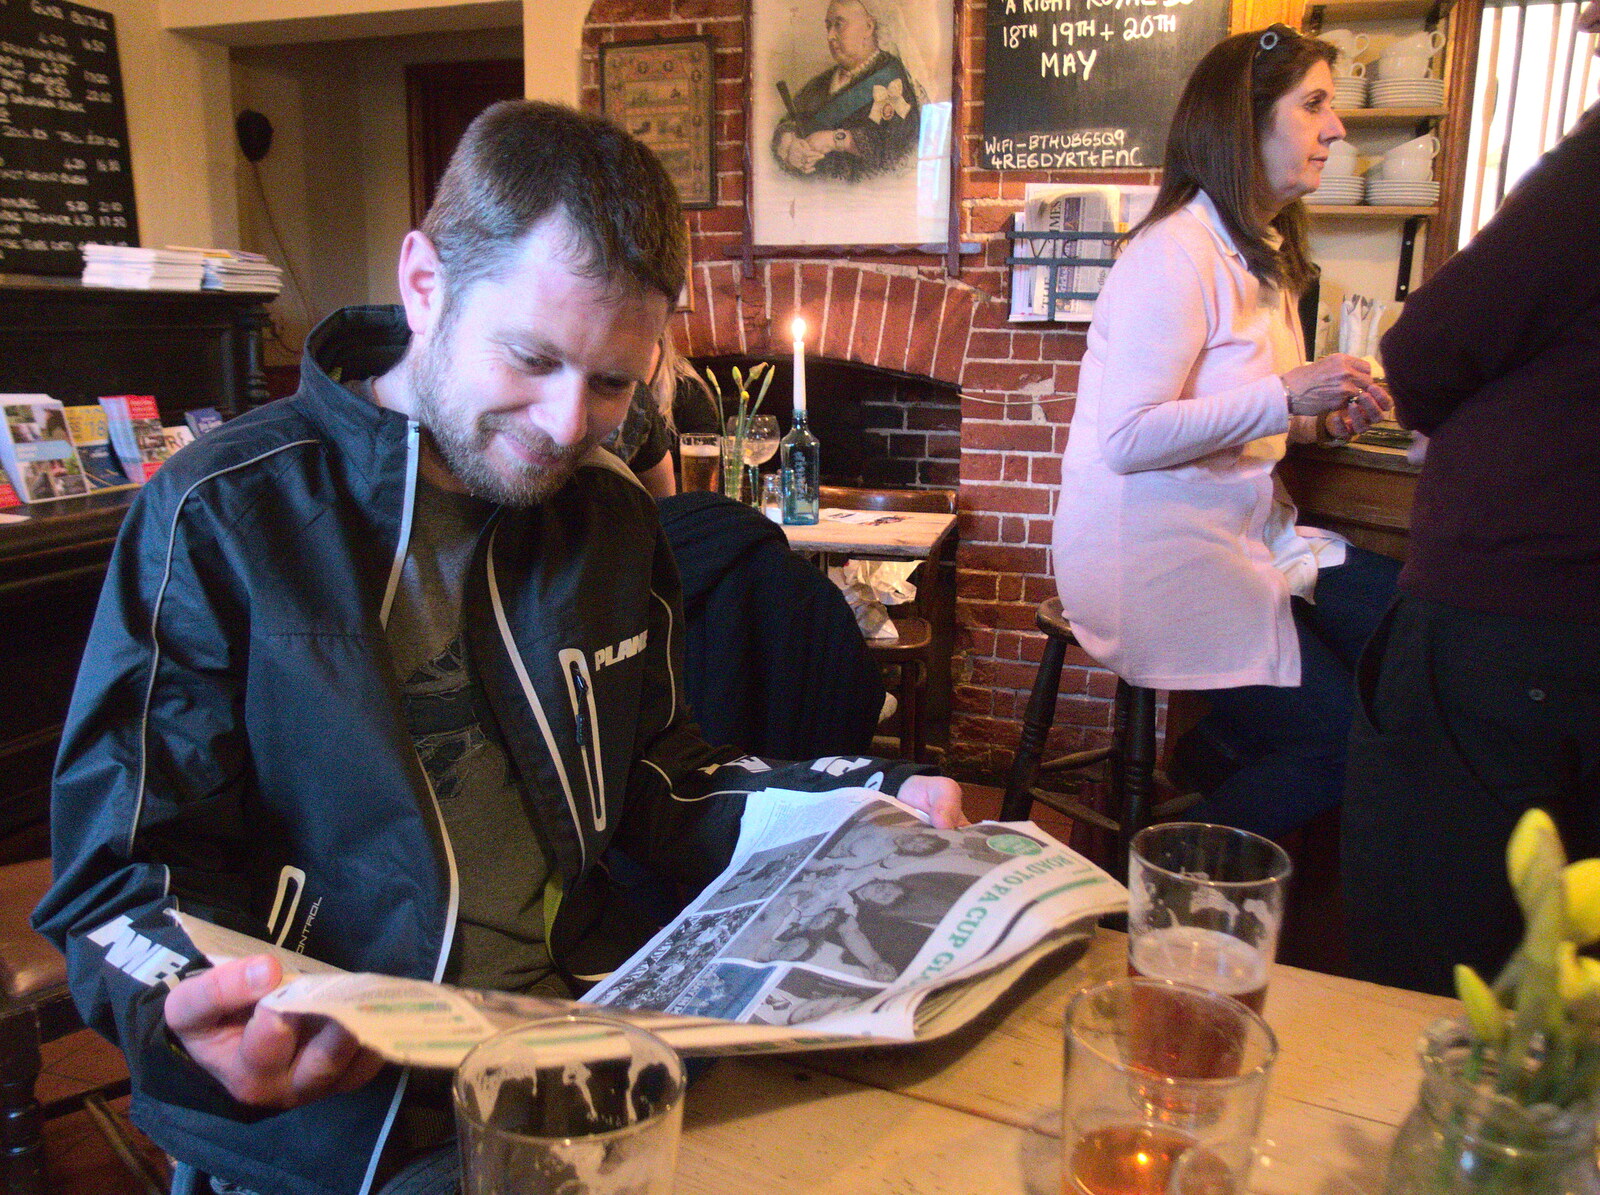 The Boy Phil reads the paper in The Victoria from A Bike Ride to the Railway Tavern, Mellis, Suffolk - 7th May 2018